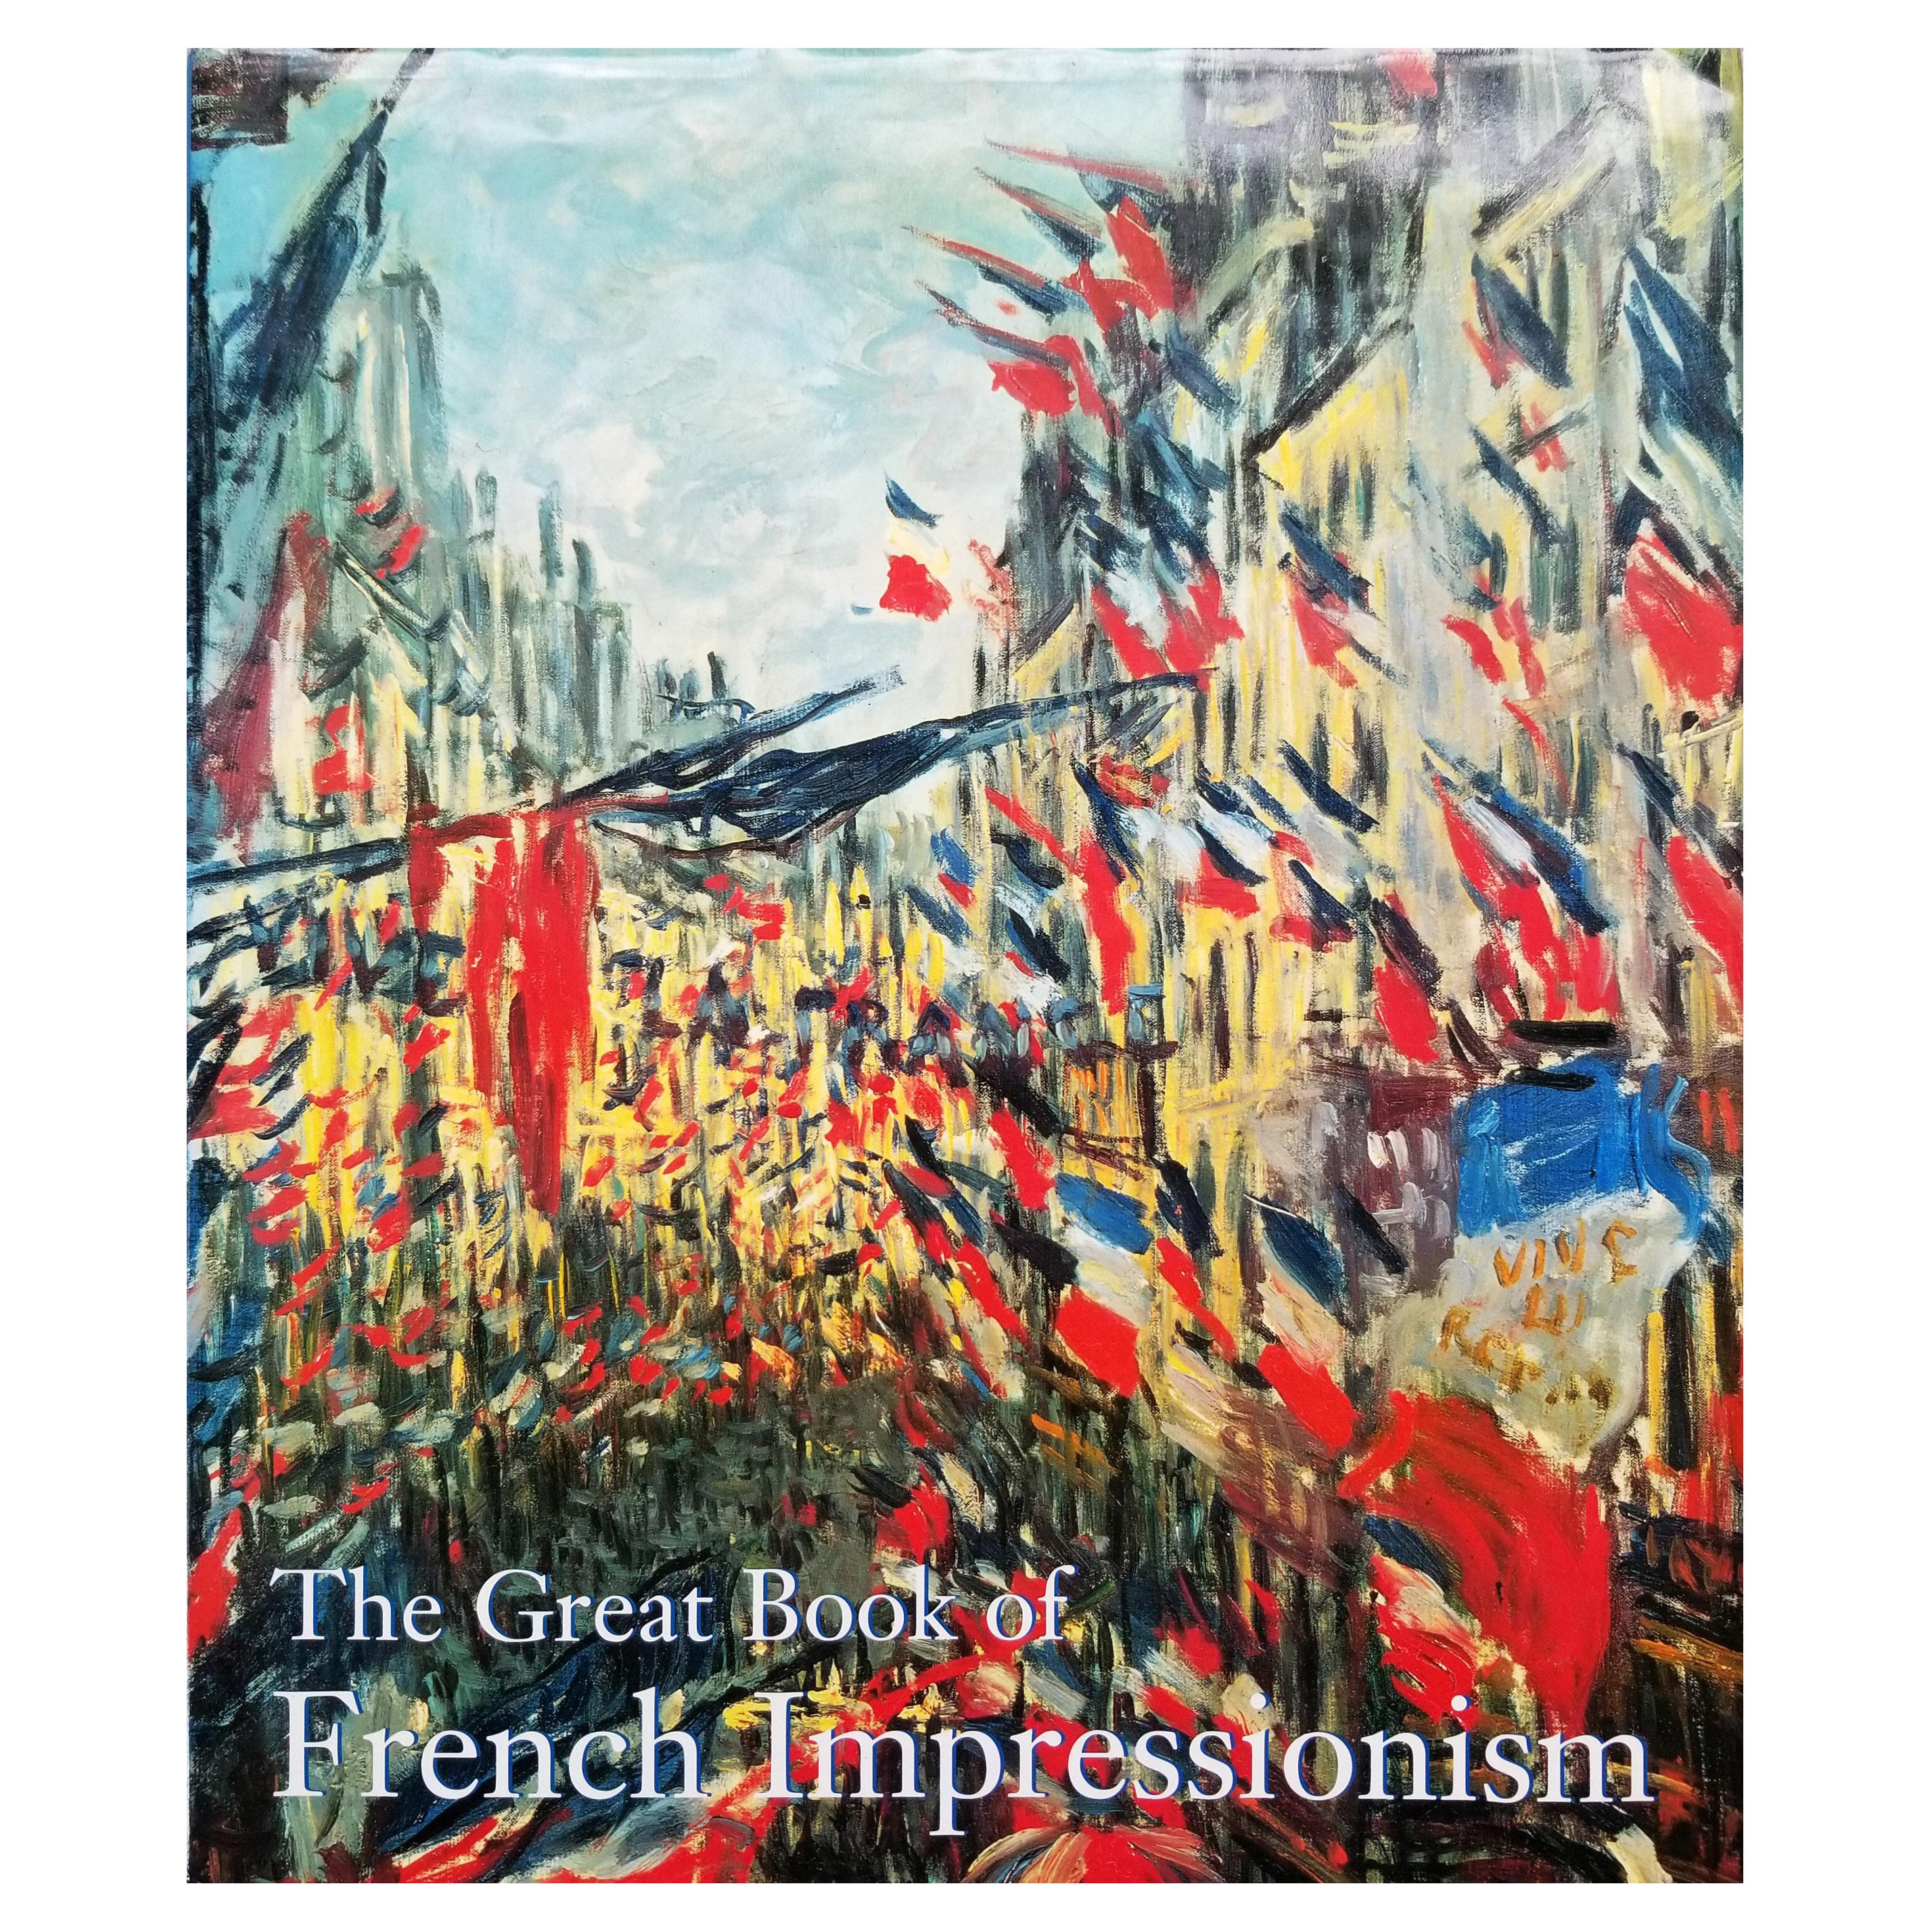 The Great Book of French Impressionism by Diane Kelder